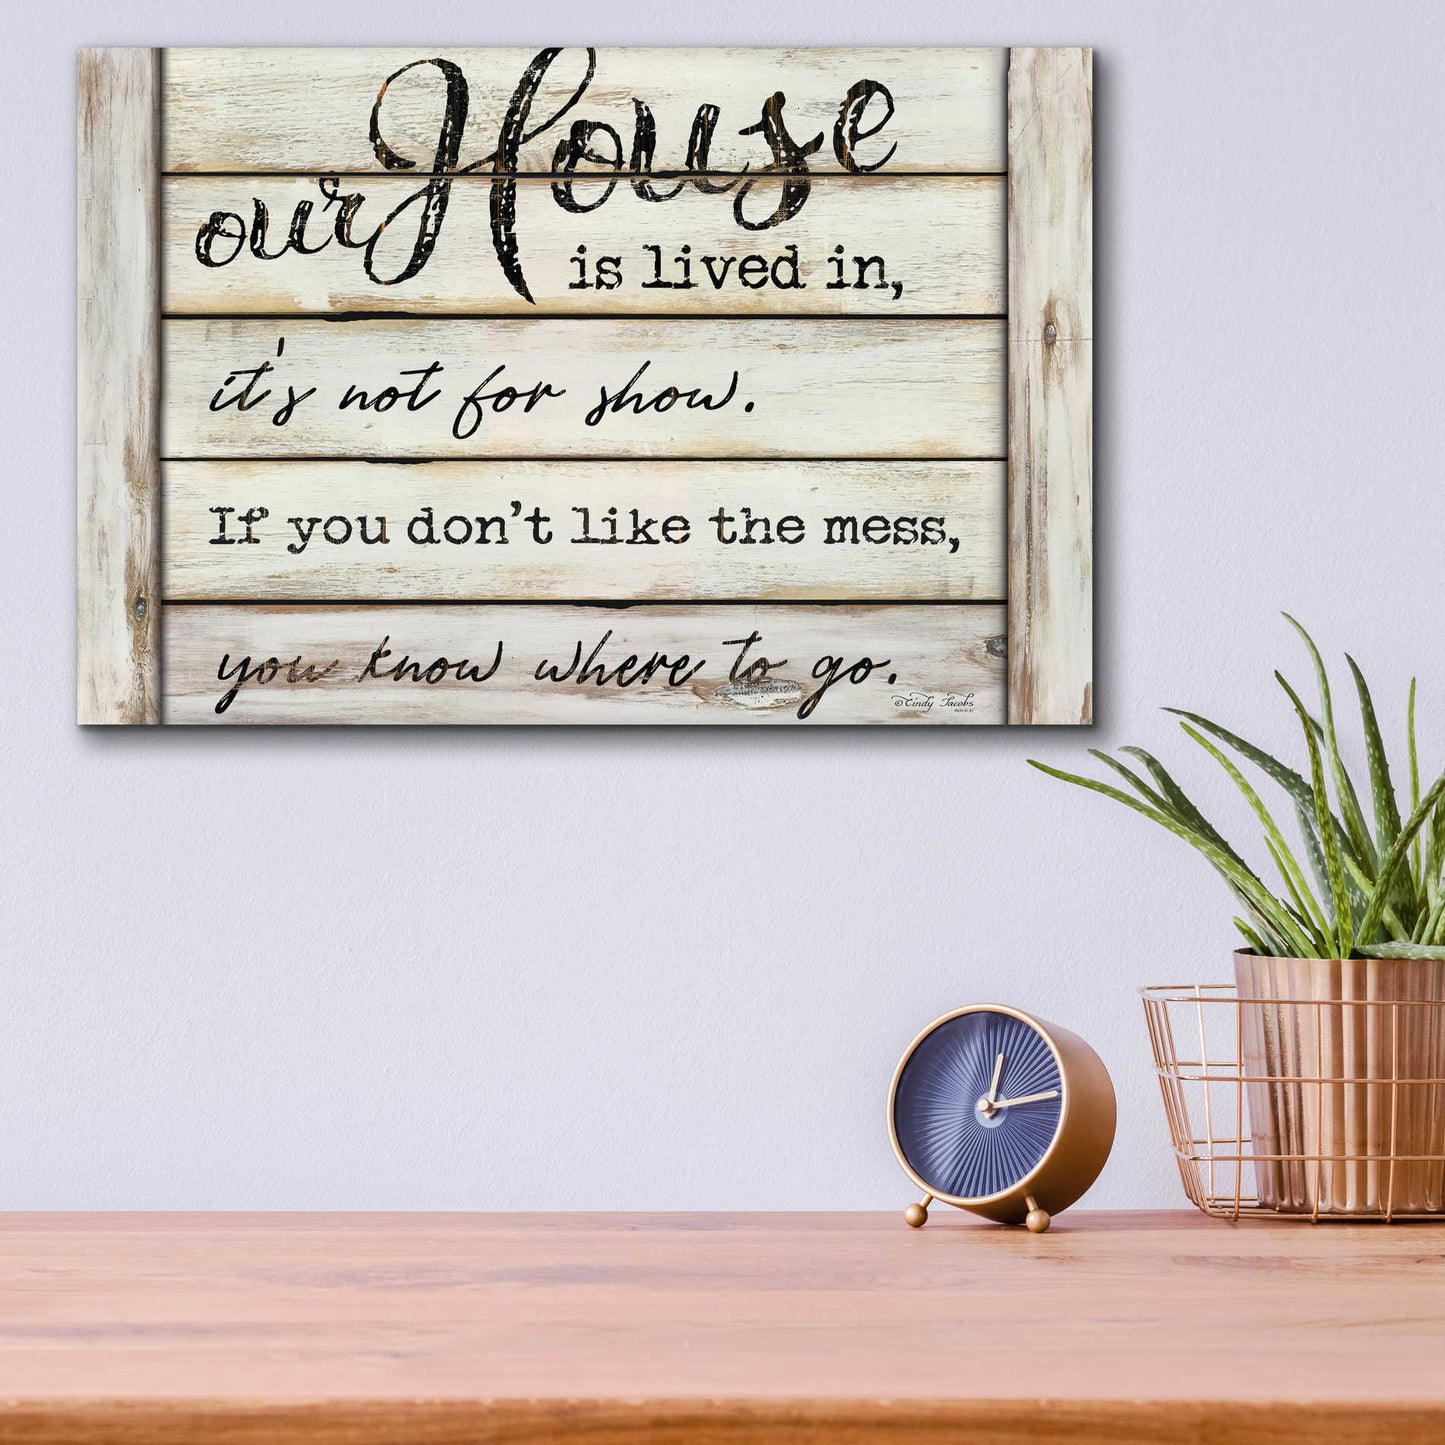 Epic Art 'Our House is Lived In' by Cindy Jacobs, Acrylic Glass Wall Art,16x12